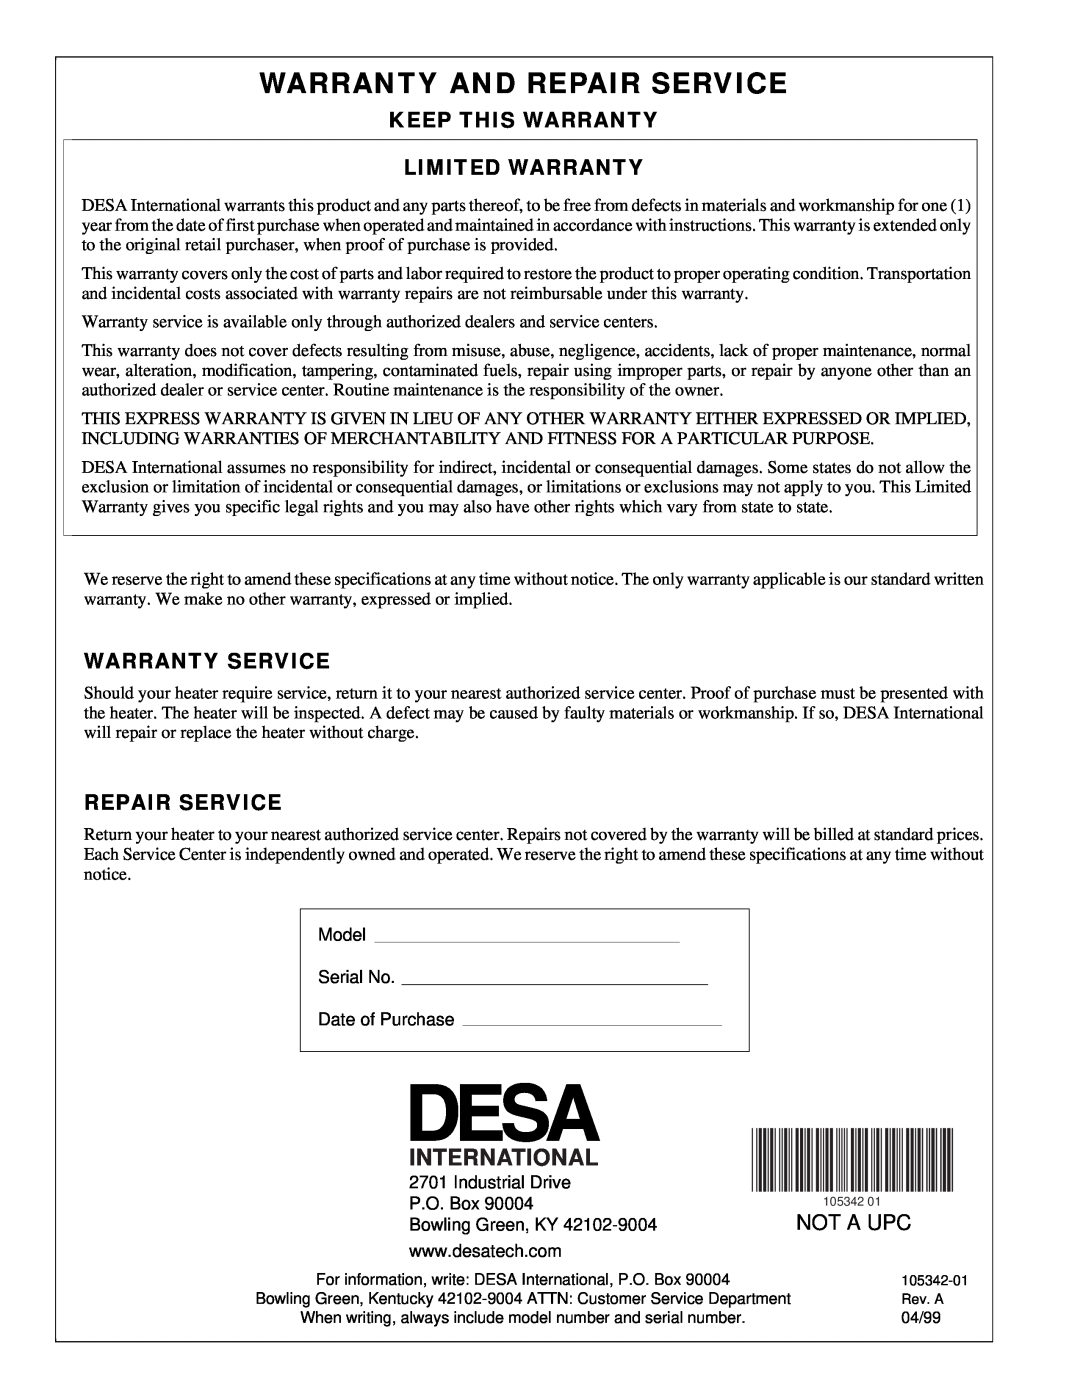 Desa RM100LP owner manual Warranty And Repair Service, International, Not A Upc 